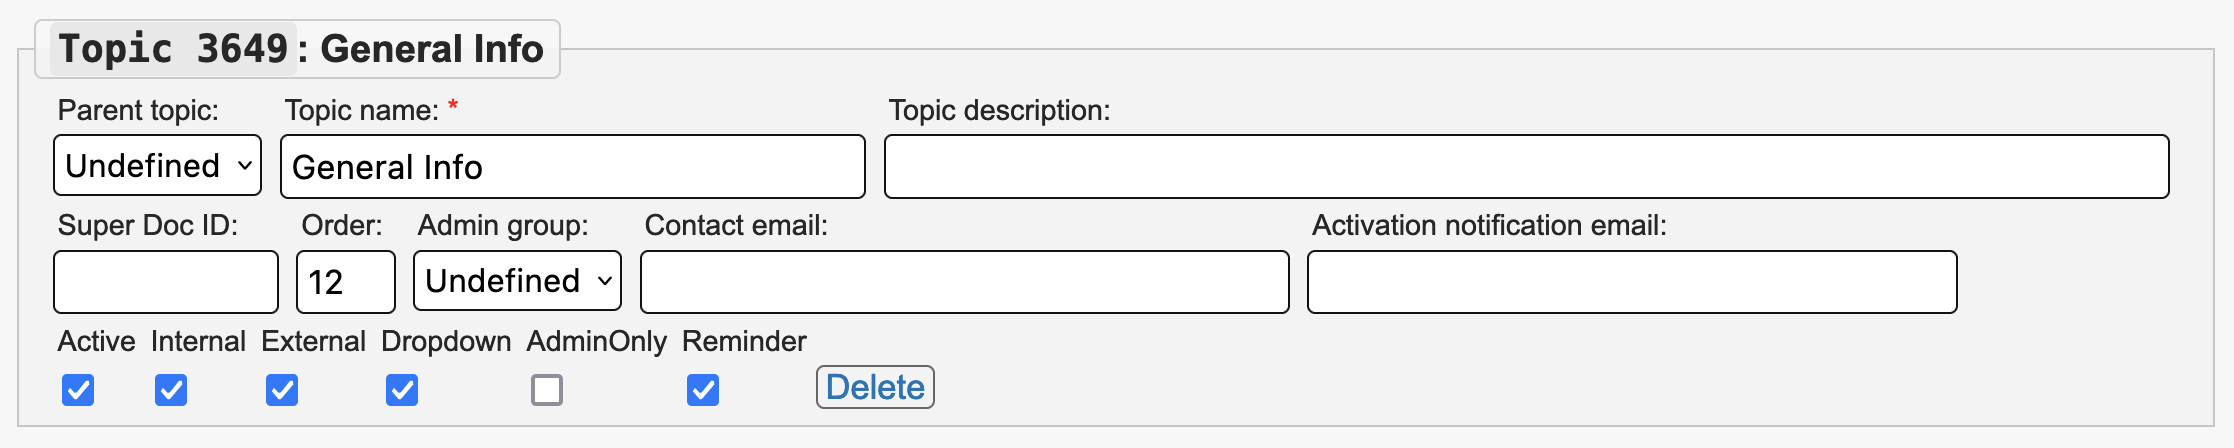 Topics are structured as a set of fields with a label. The label will include the topic ID number and name, and the fields will be a combination of dropdown menus, text fields, and checkboxes.